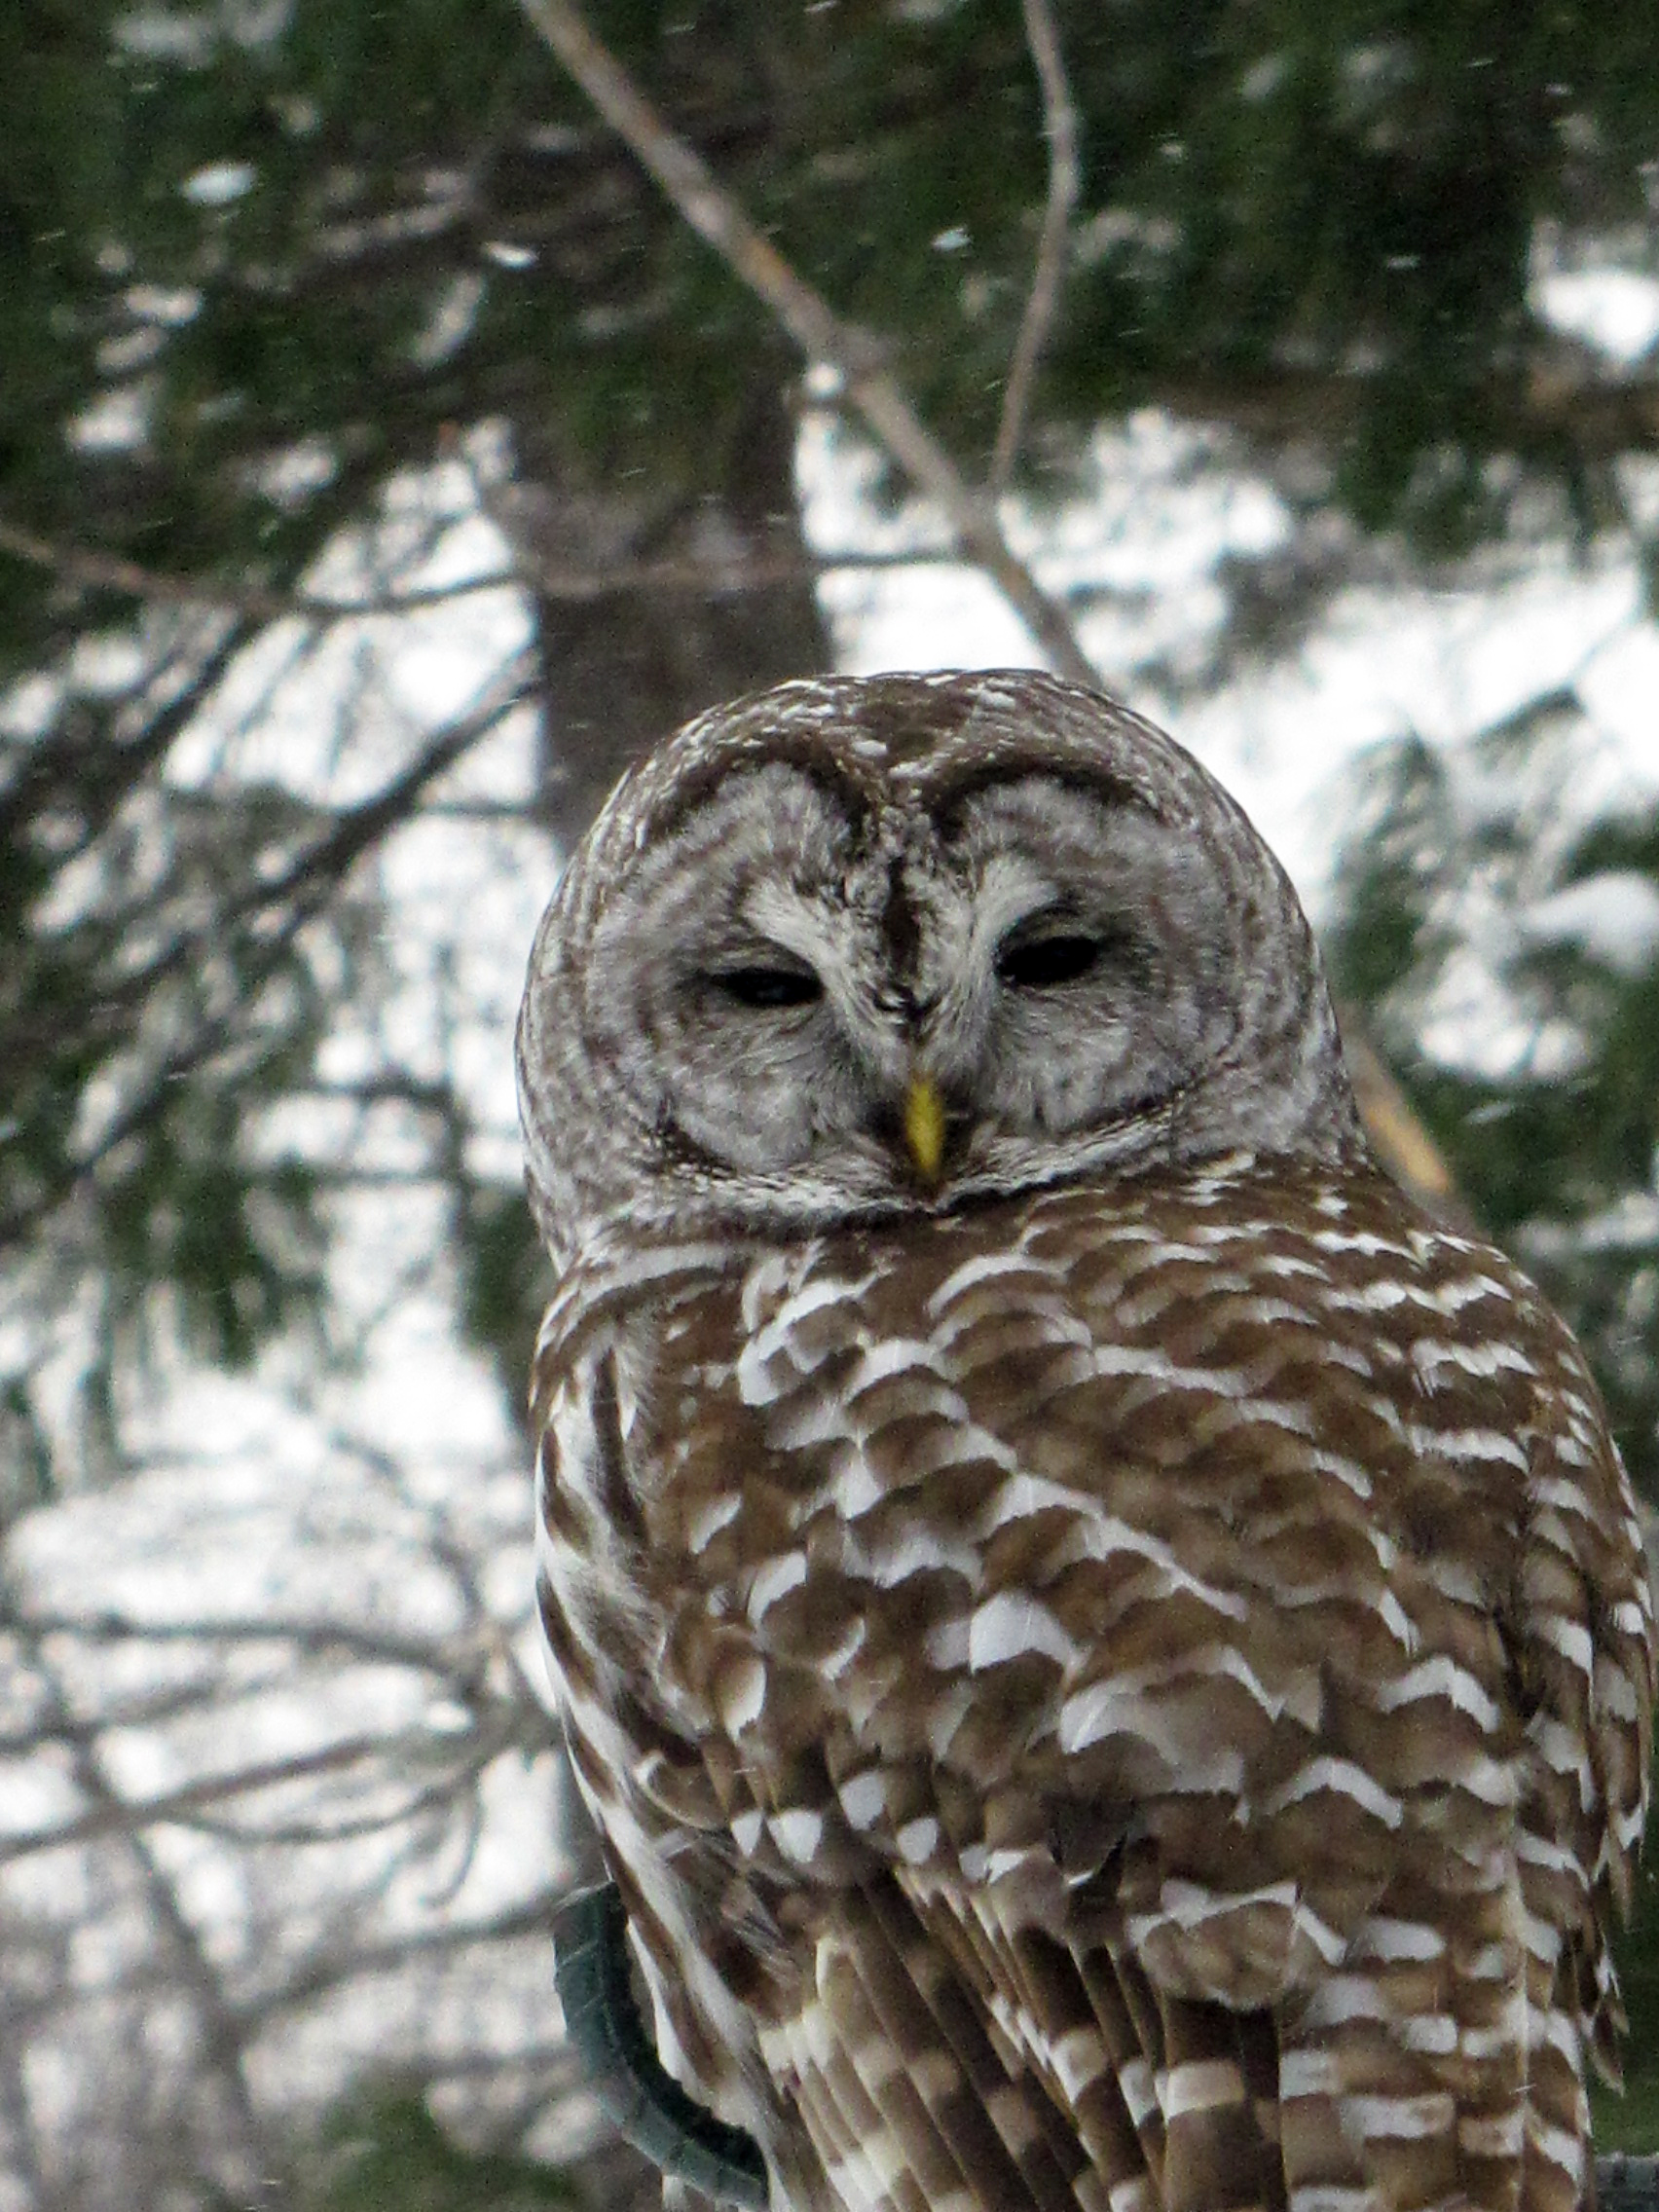 A barred owl looks down at the camera from its perch (photo: Laurel Swope-Brush)